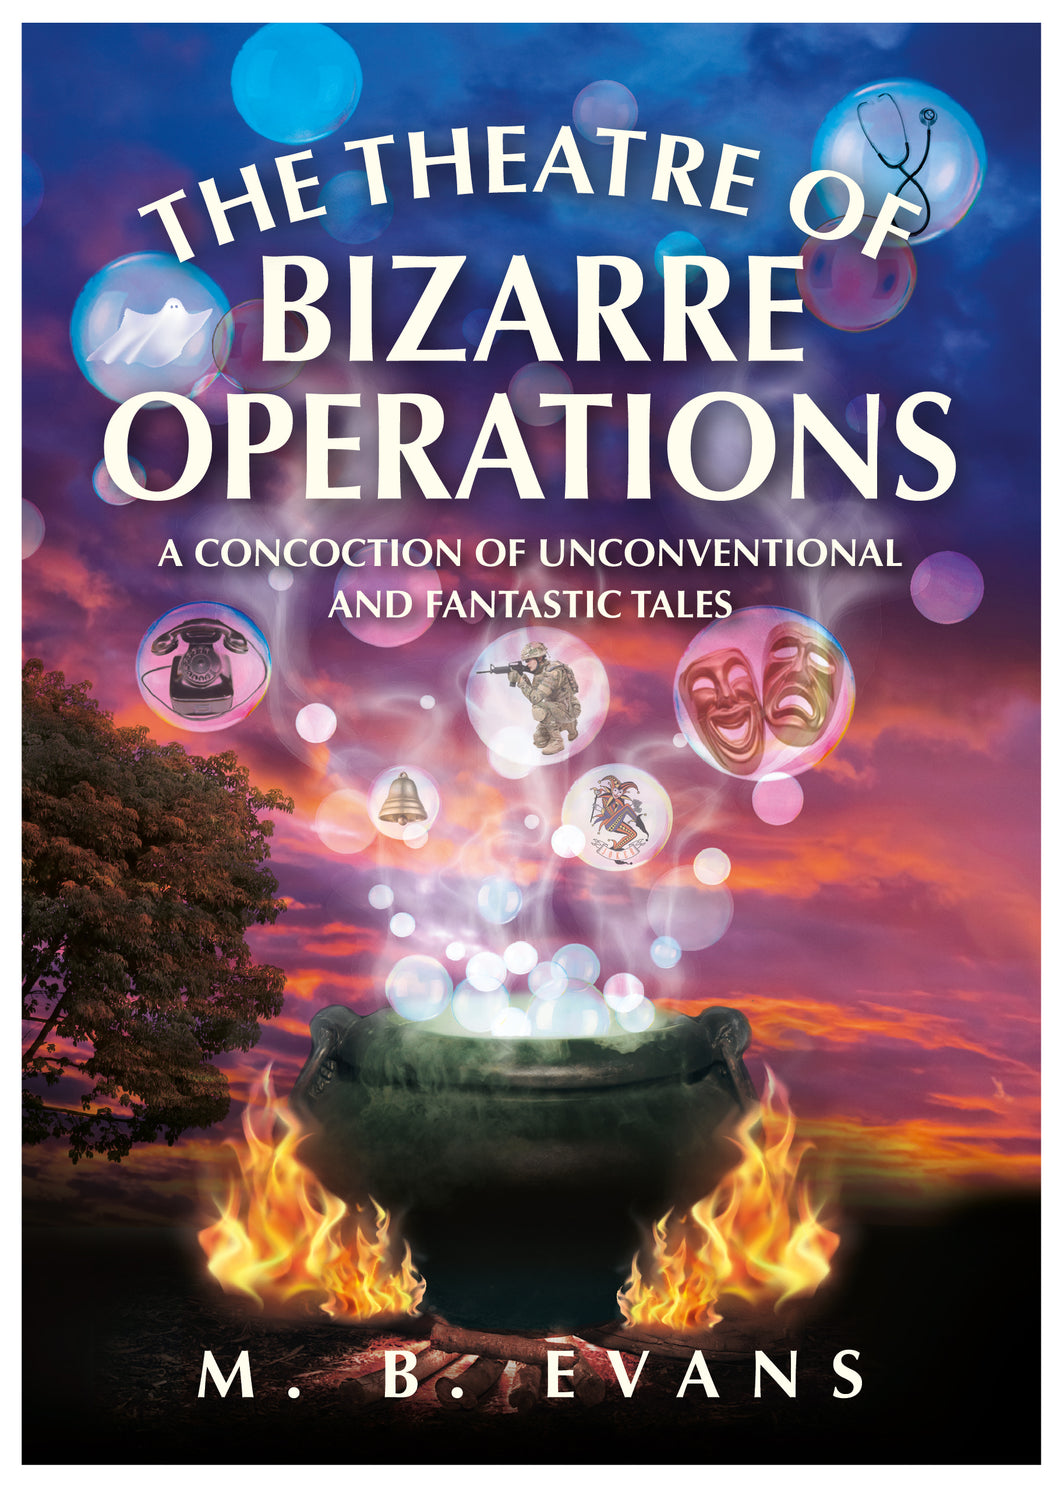 The Theatre of Bizarre Operations - A Concoction of Unconventional and Fantastic Tales - M. B. Evans